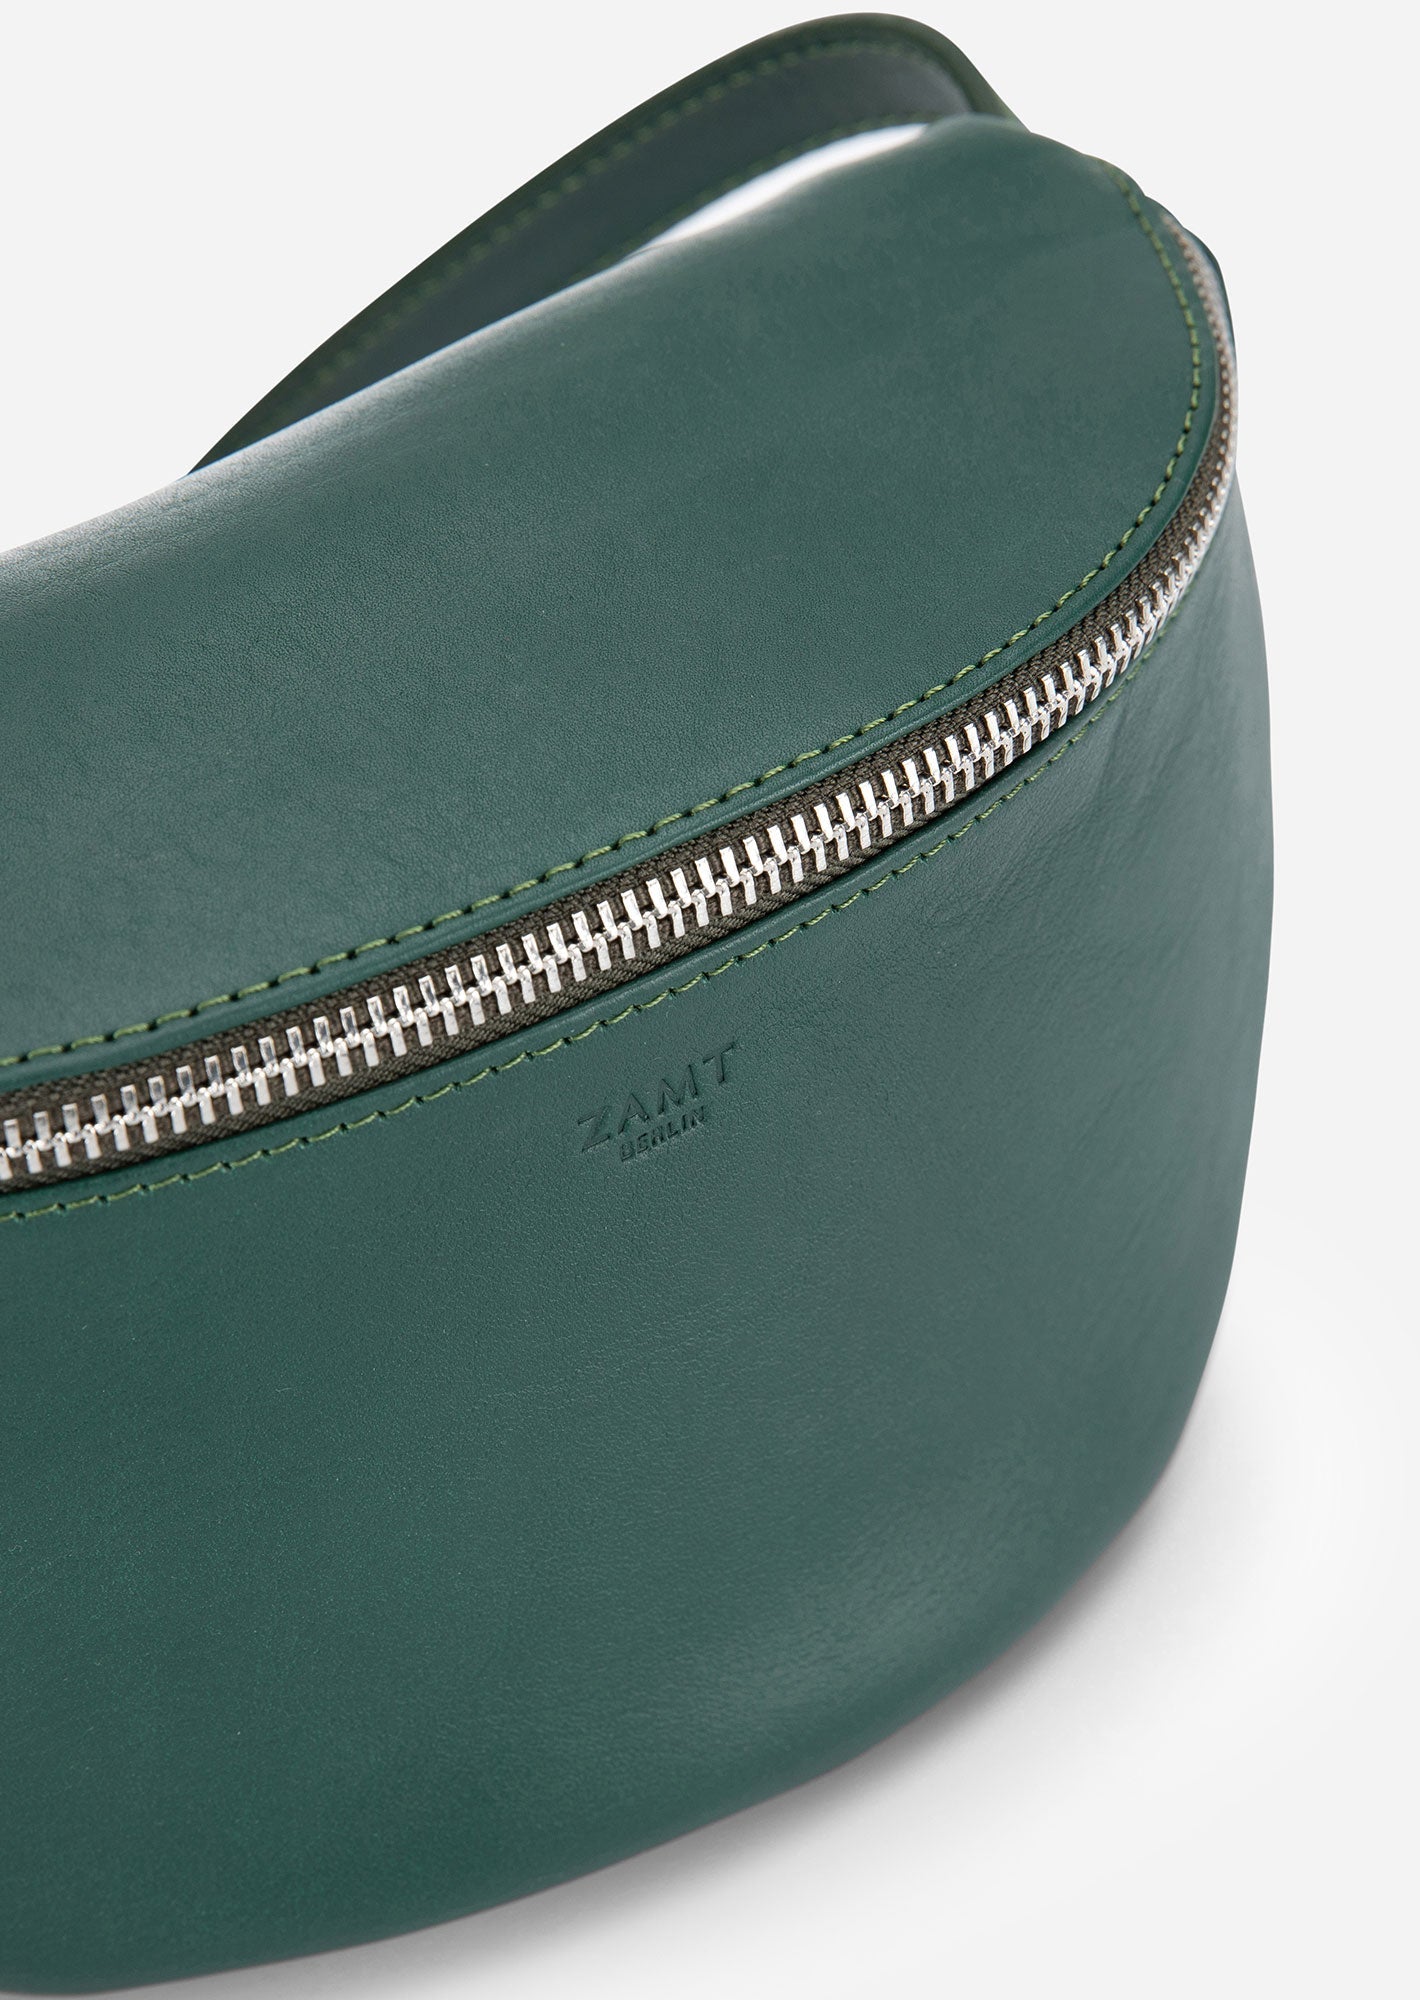 HIP_BAG_CAN_Green_Designed_in_Berlin_Made_to_last_Handmade_in_Poland.